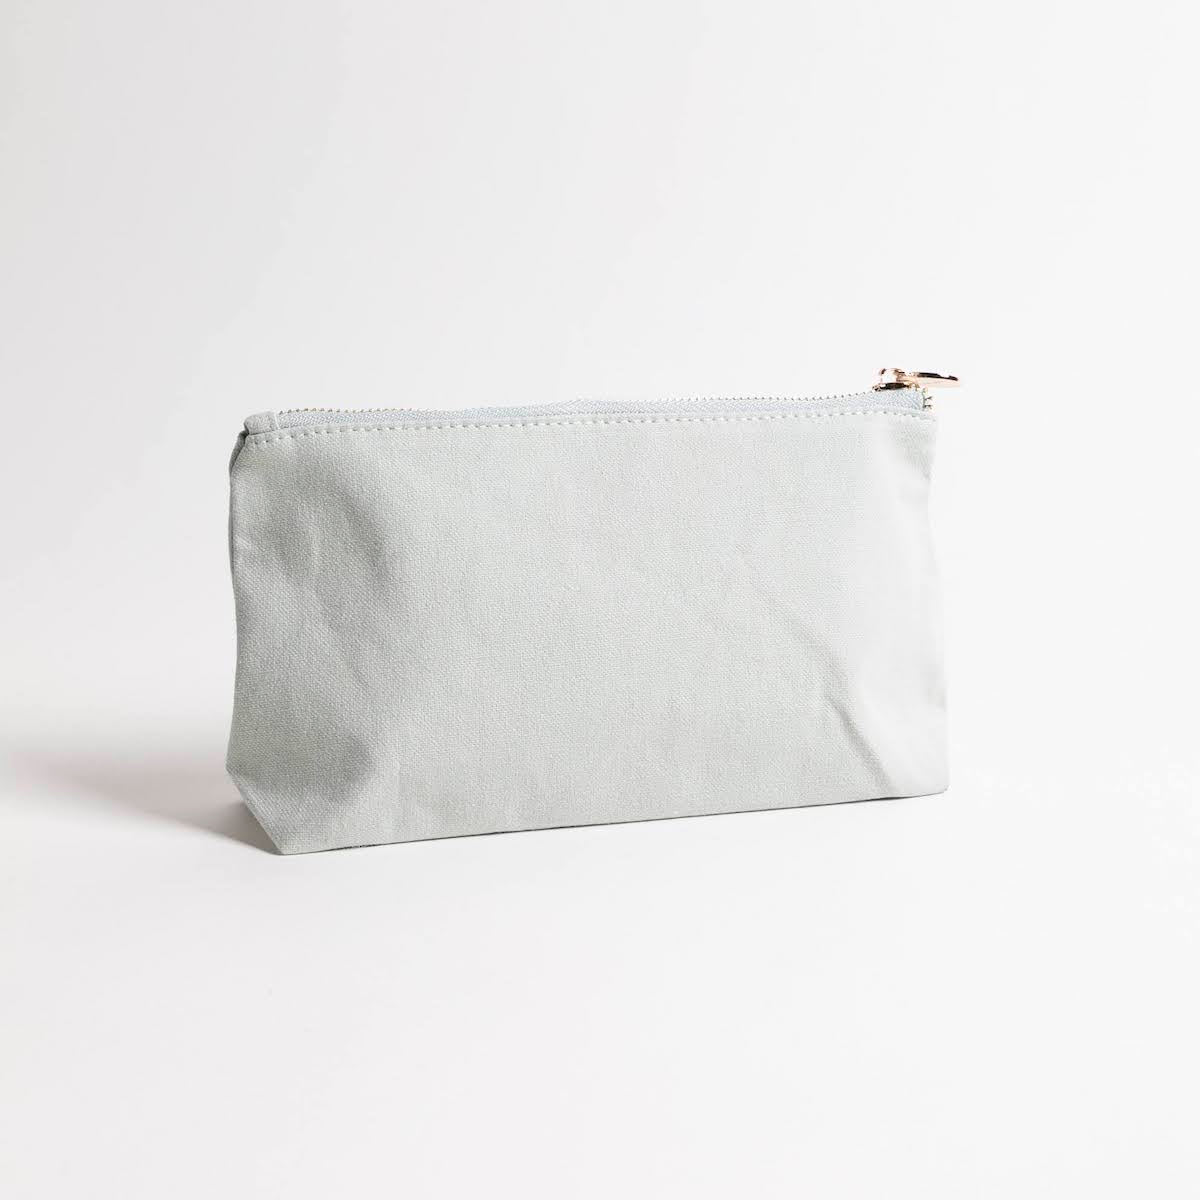 Meadows First Bloom Pouch - P I C N I C 